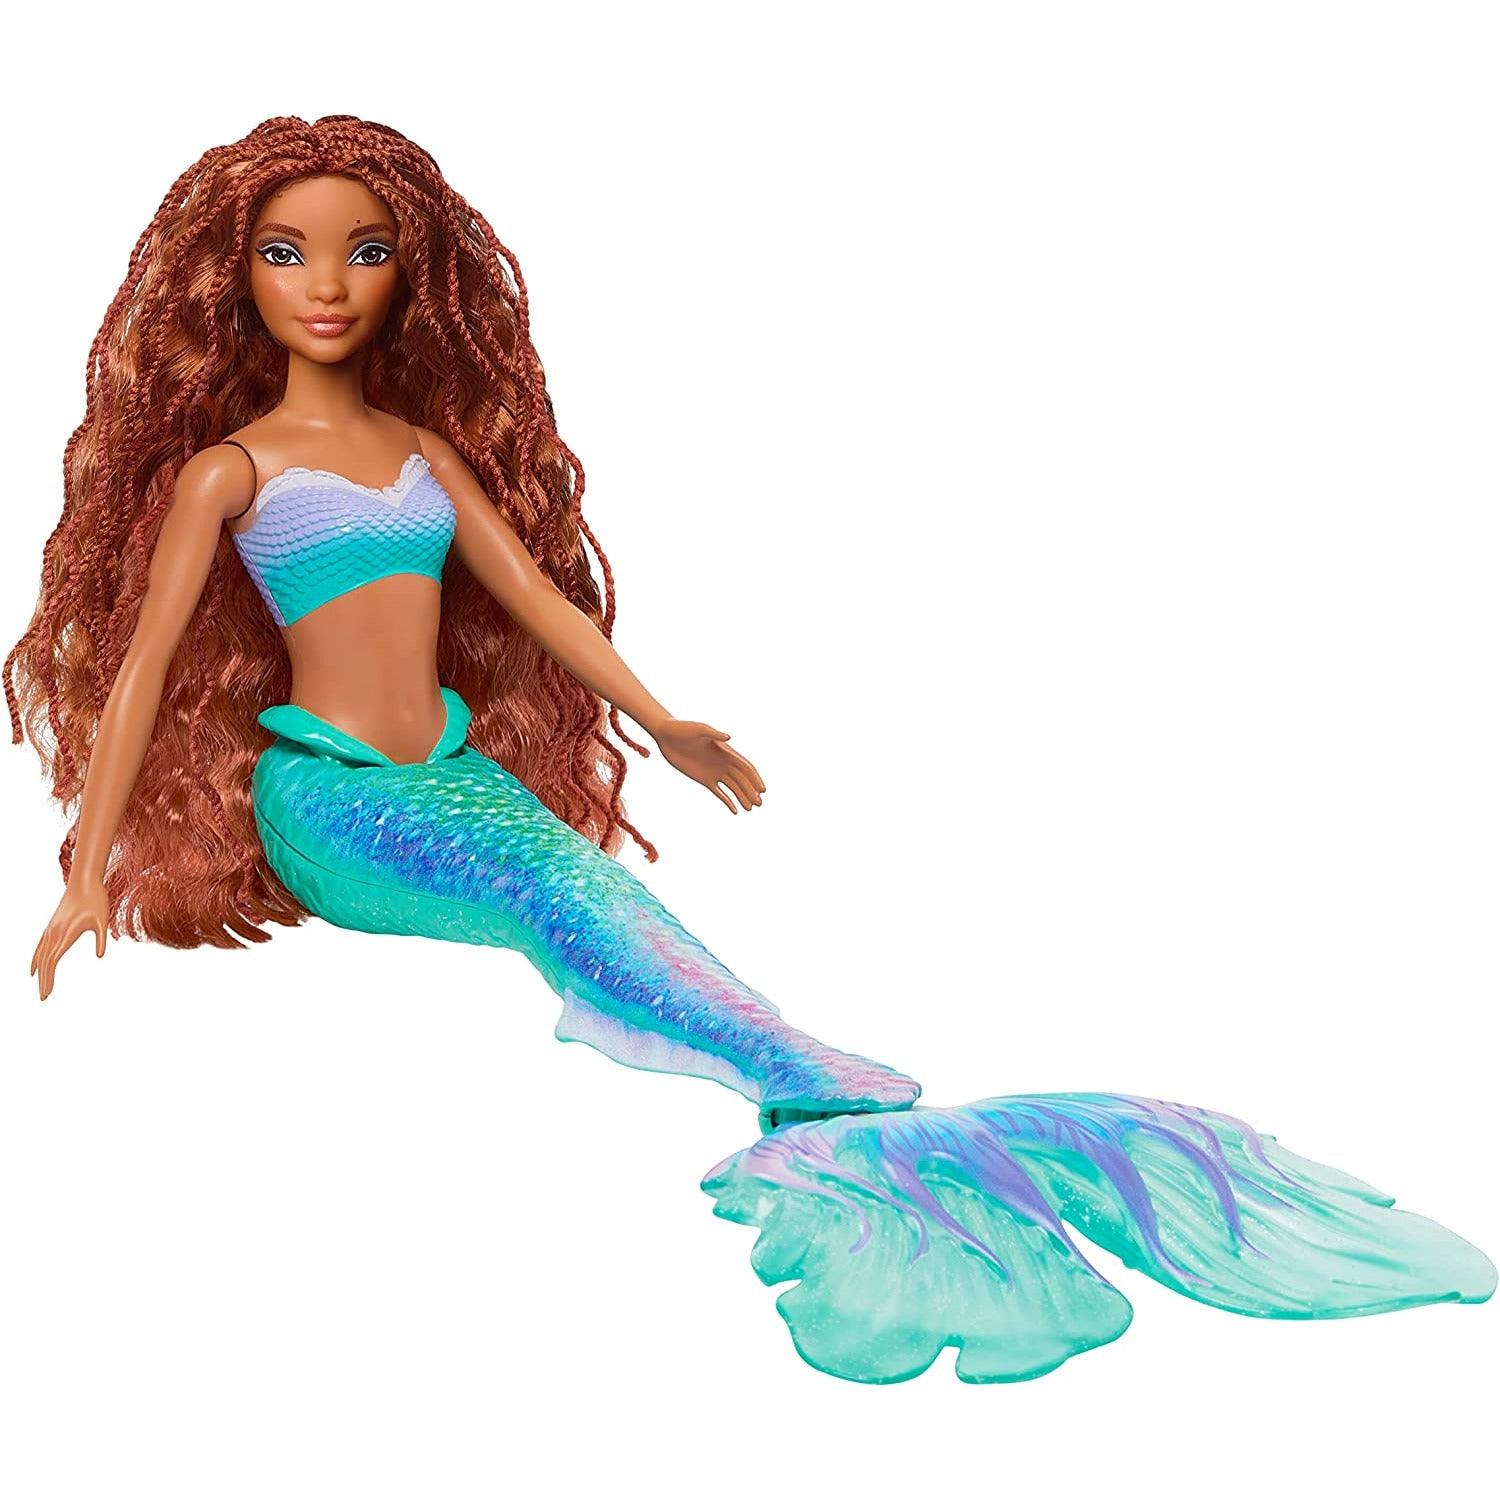 Disney The Little Mermaid Ariel Doll, Mermaid Fashion Doll with Signature Outfit, Toys Inspired by Disney’s The Little Mermaid